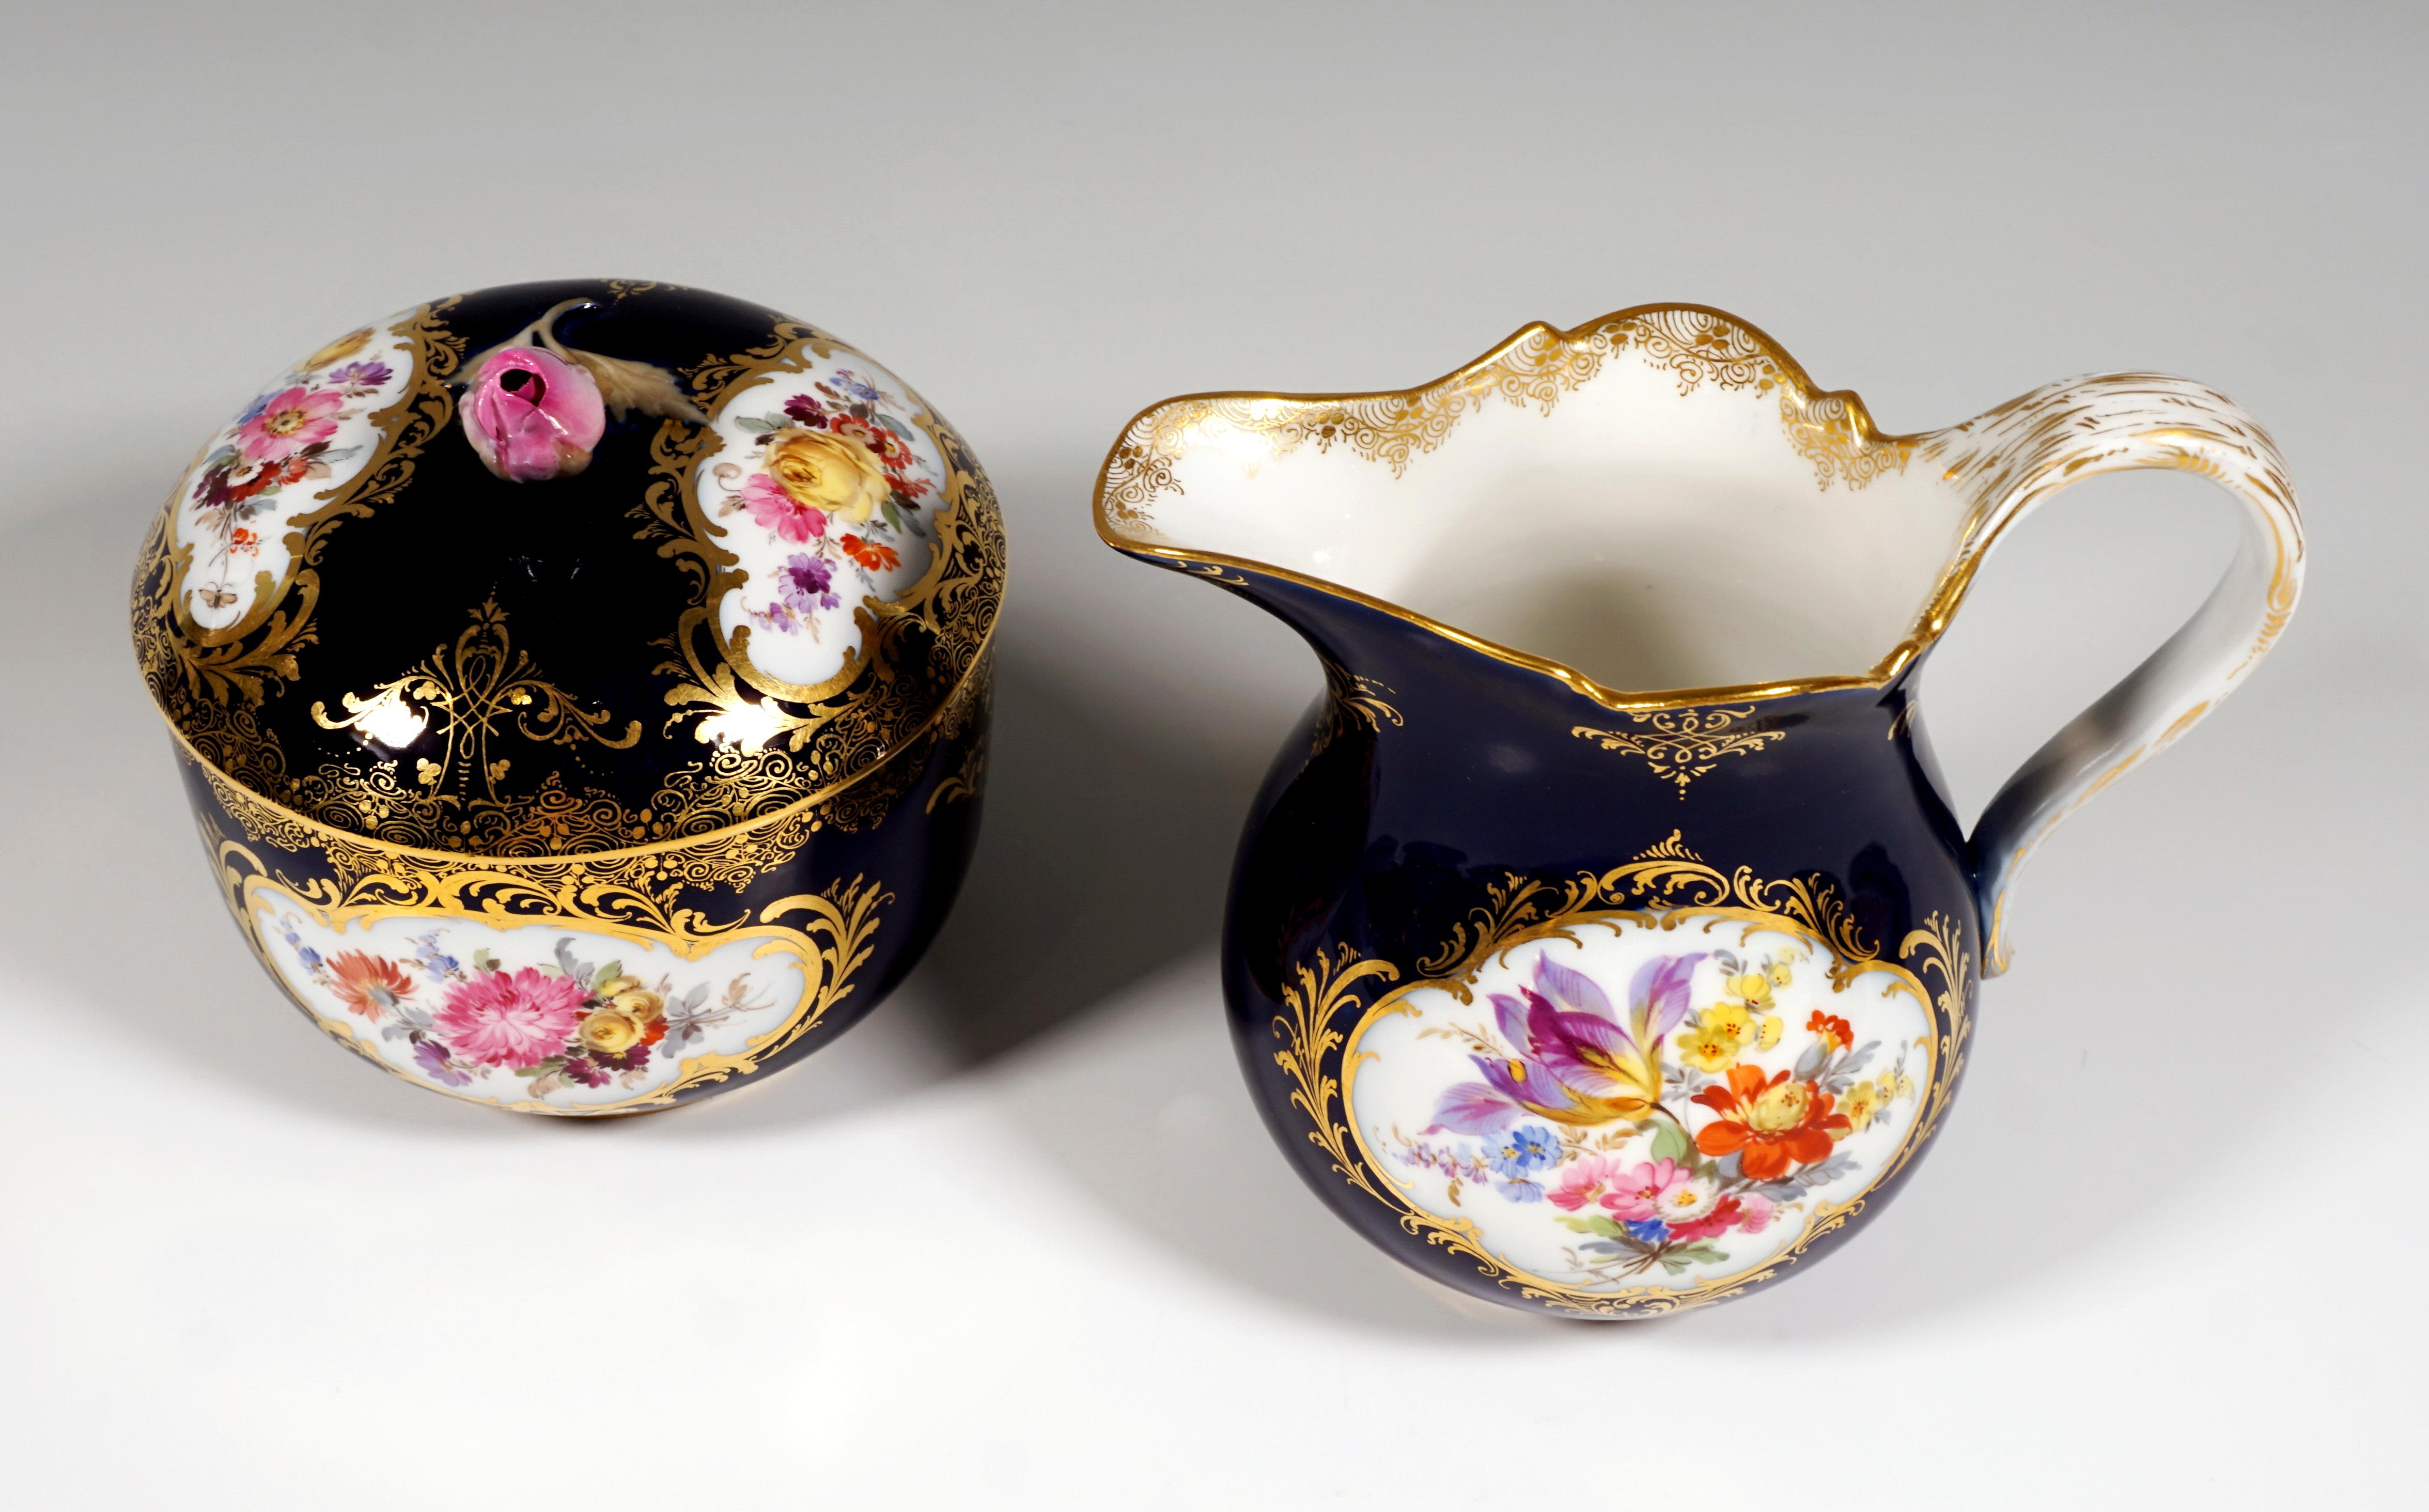 Hand-Painted 19th Century Meissen Coffee Set for 6 Persons, Cobalt, Bouquets and Gold Decor